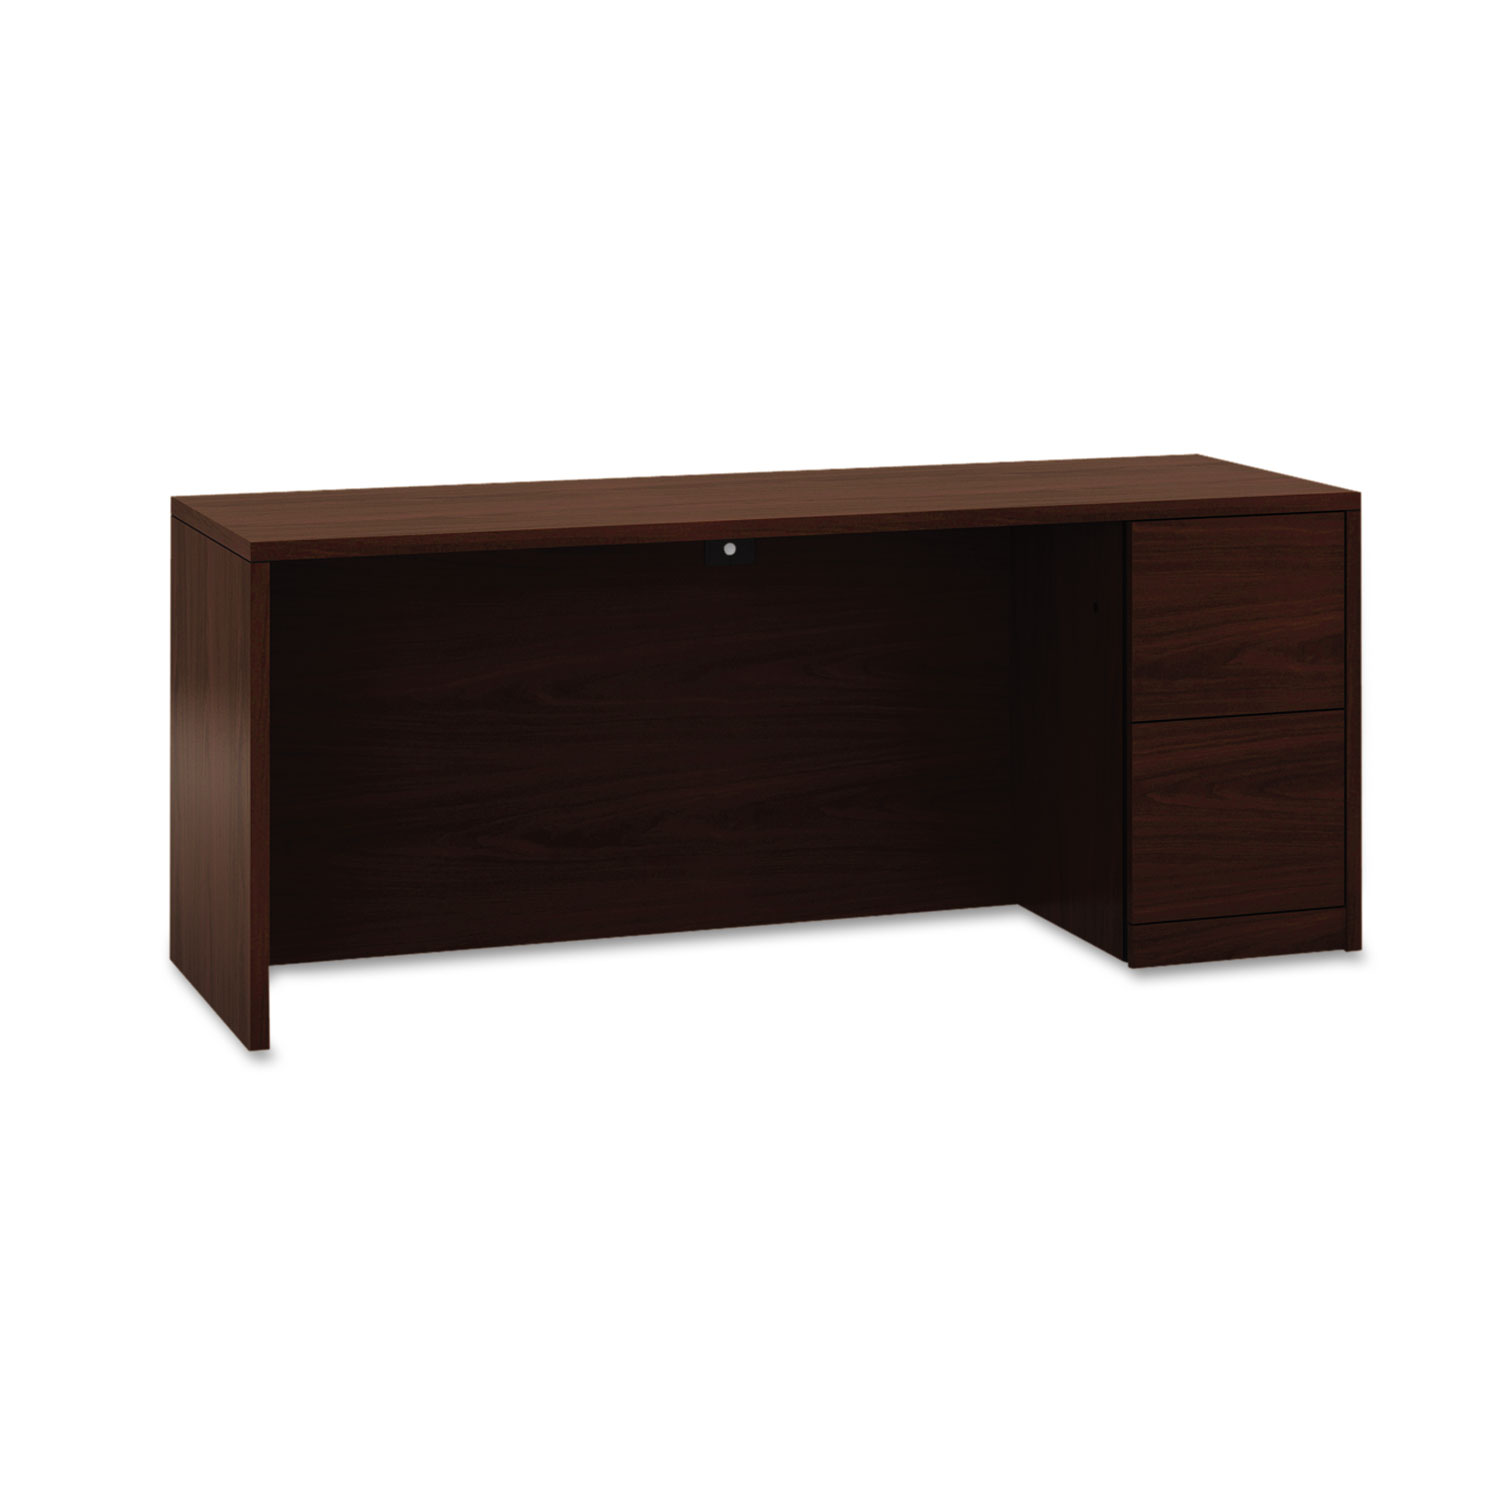 10500 Series Full-Height Right Ped Credenza, 72 x 24 x 29-1/2, Bourbon Cherry